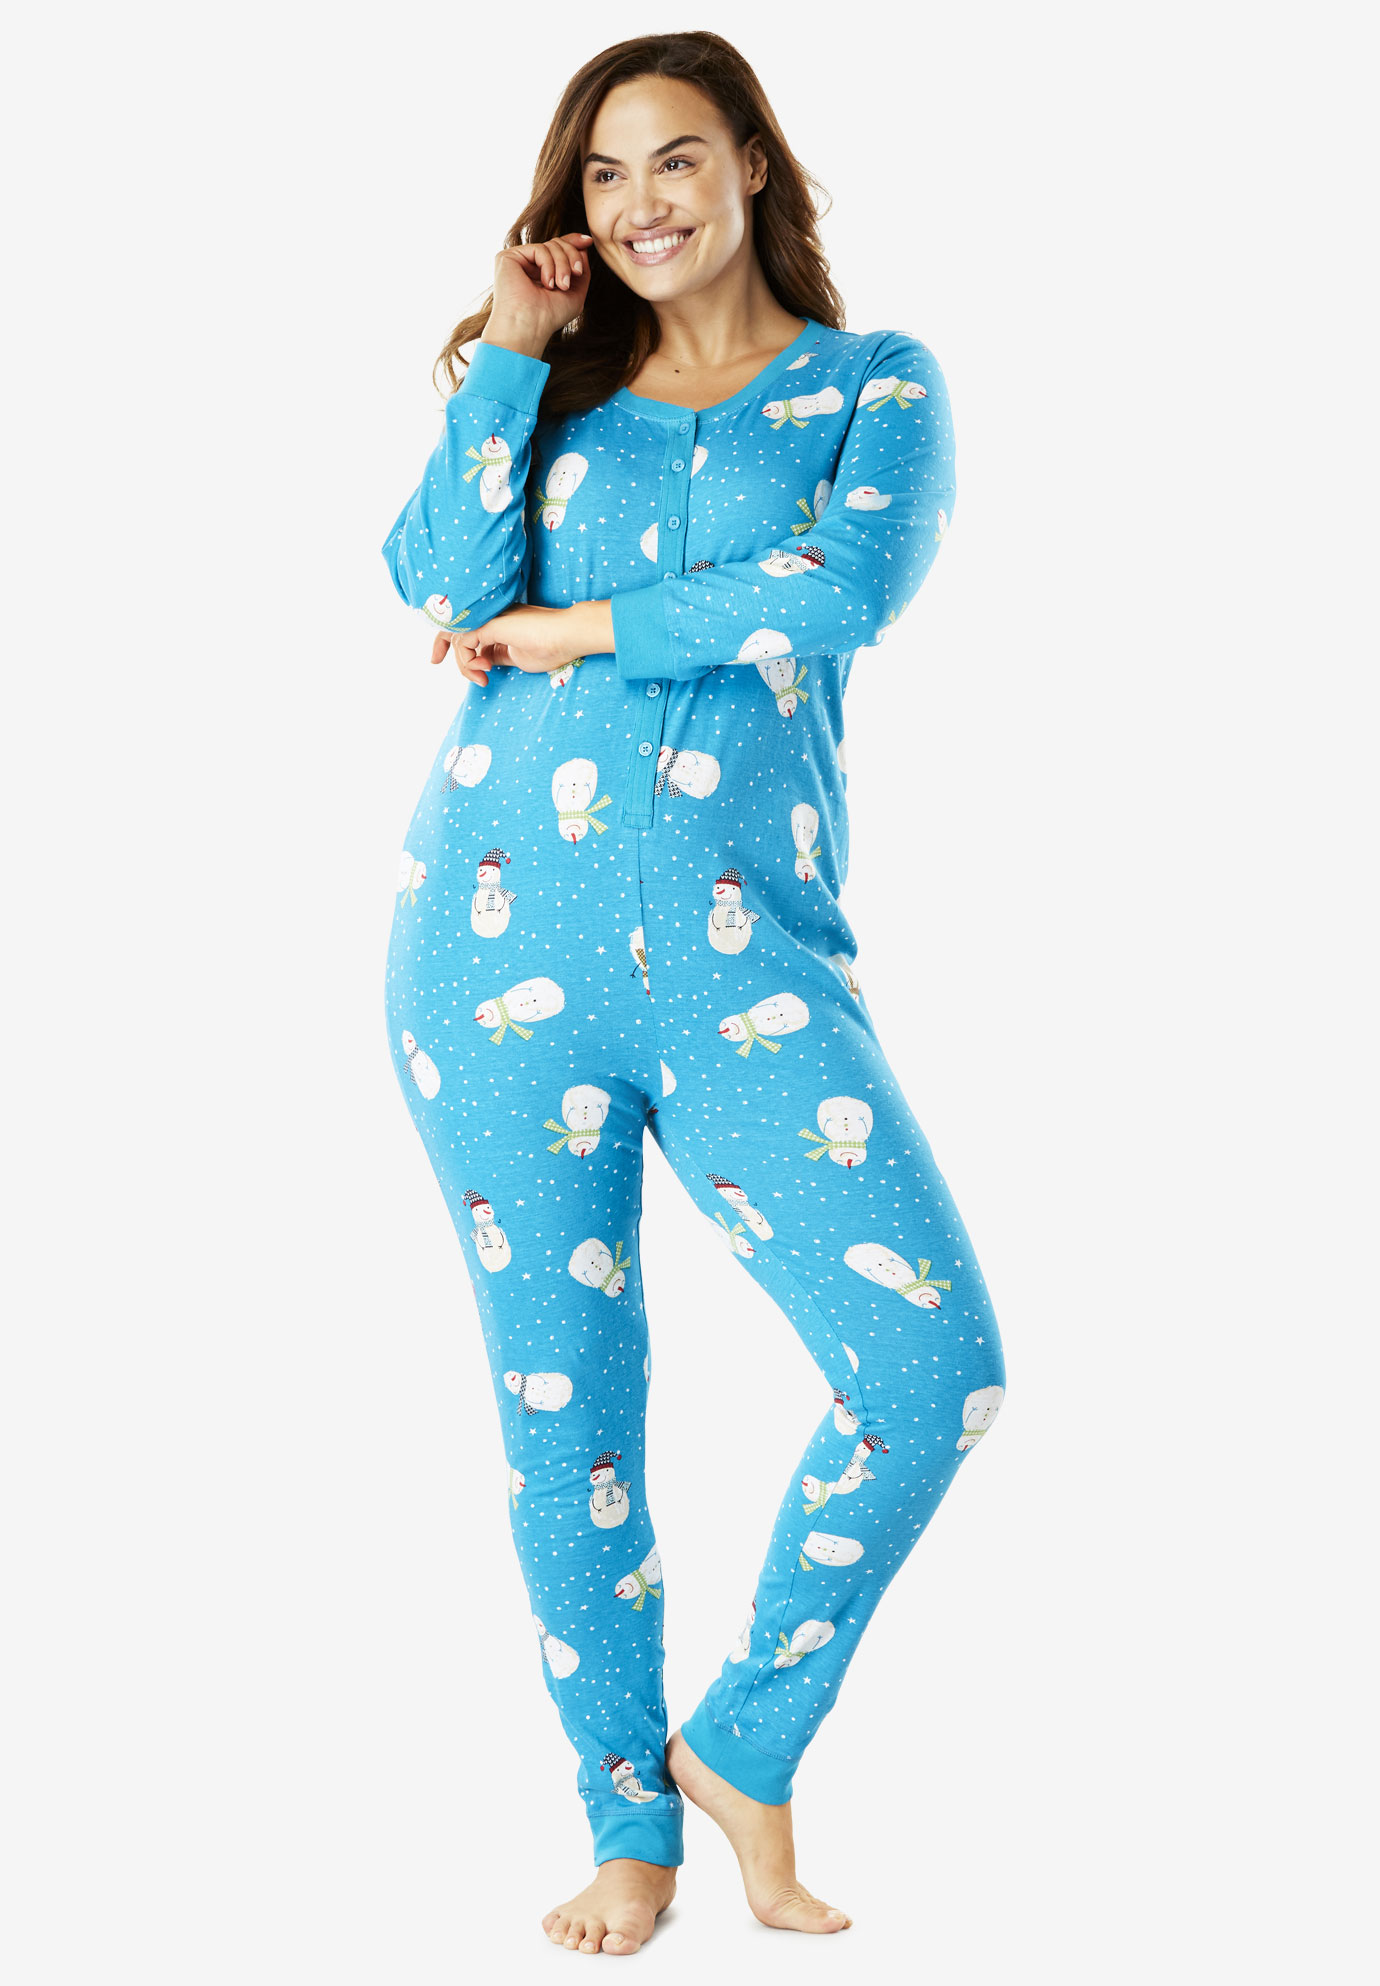 Holiday Print Onesie Pajama by Dreams & Co.®| Plus Size Sleep | Woman Within